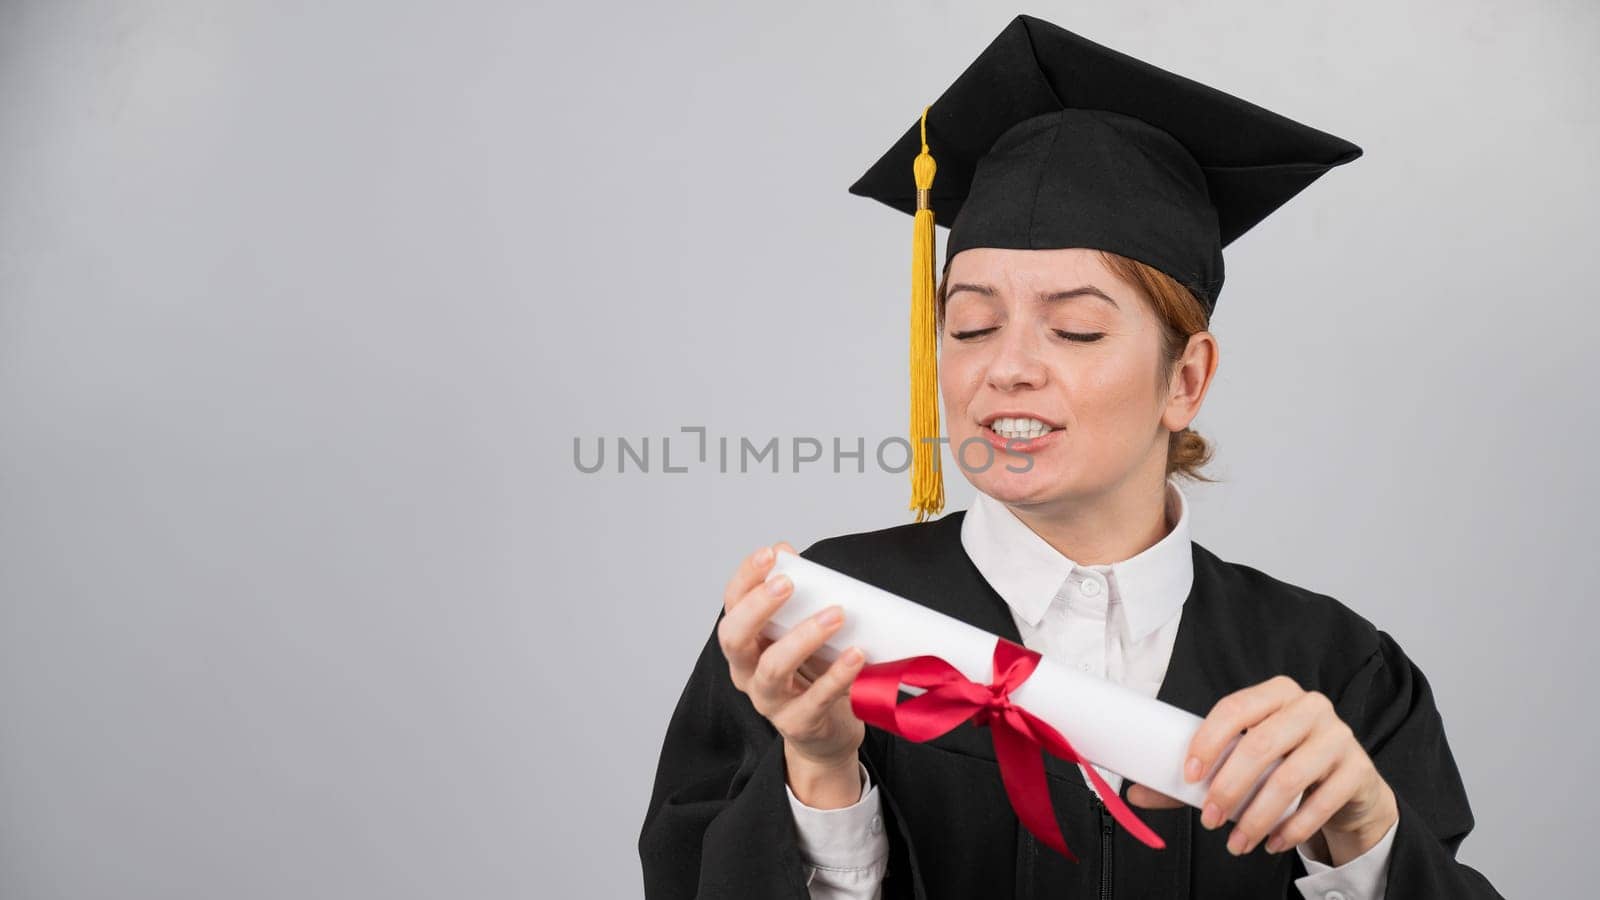 Smiling woman in graduation gown holding diploma on white background